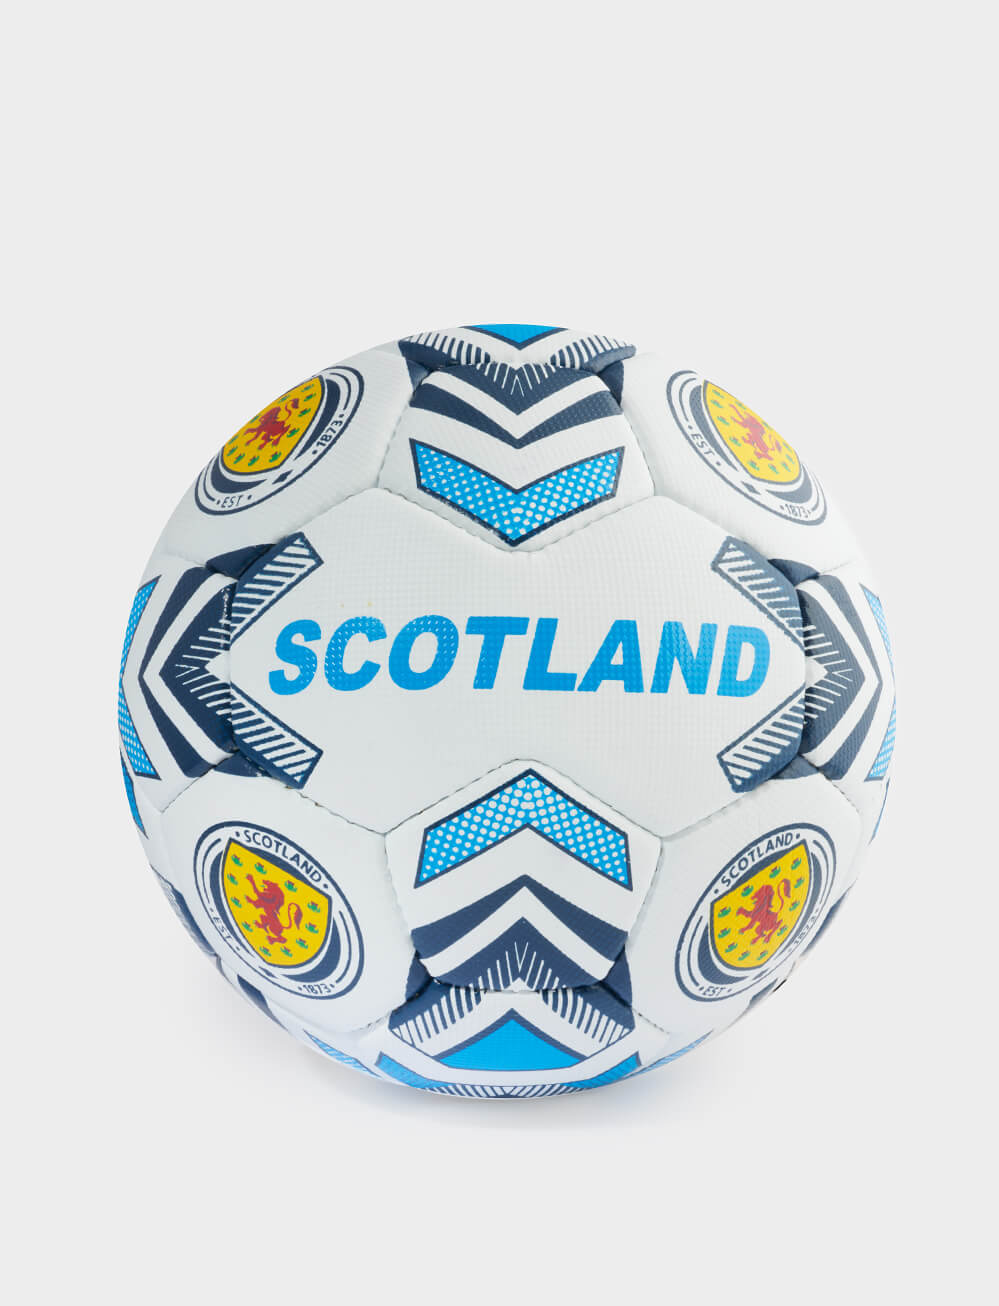 Official Team Scotland Size 5 Football - The World Football Store